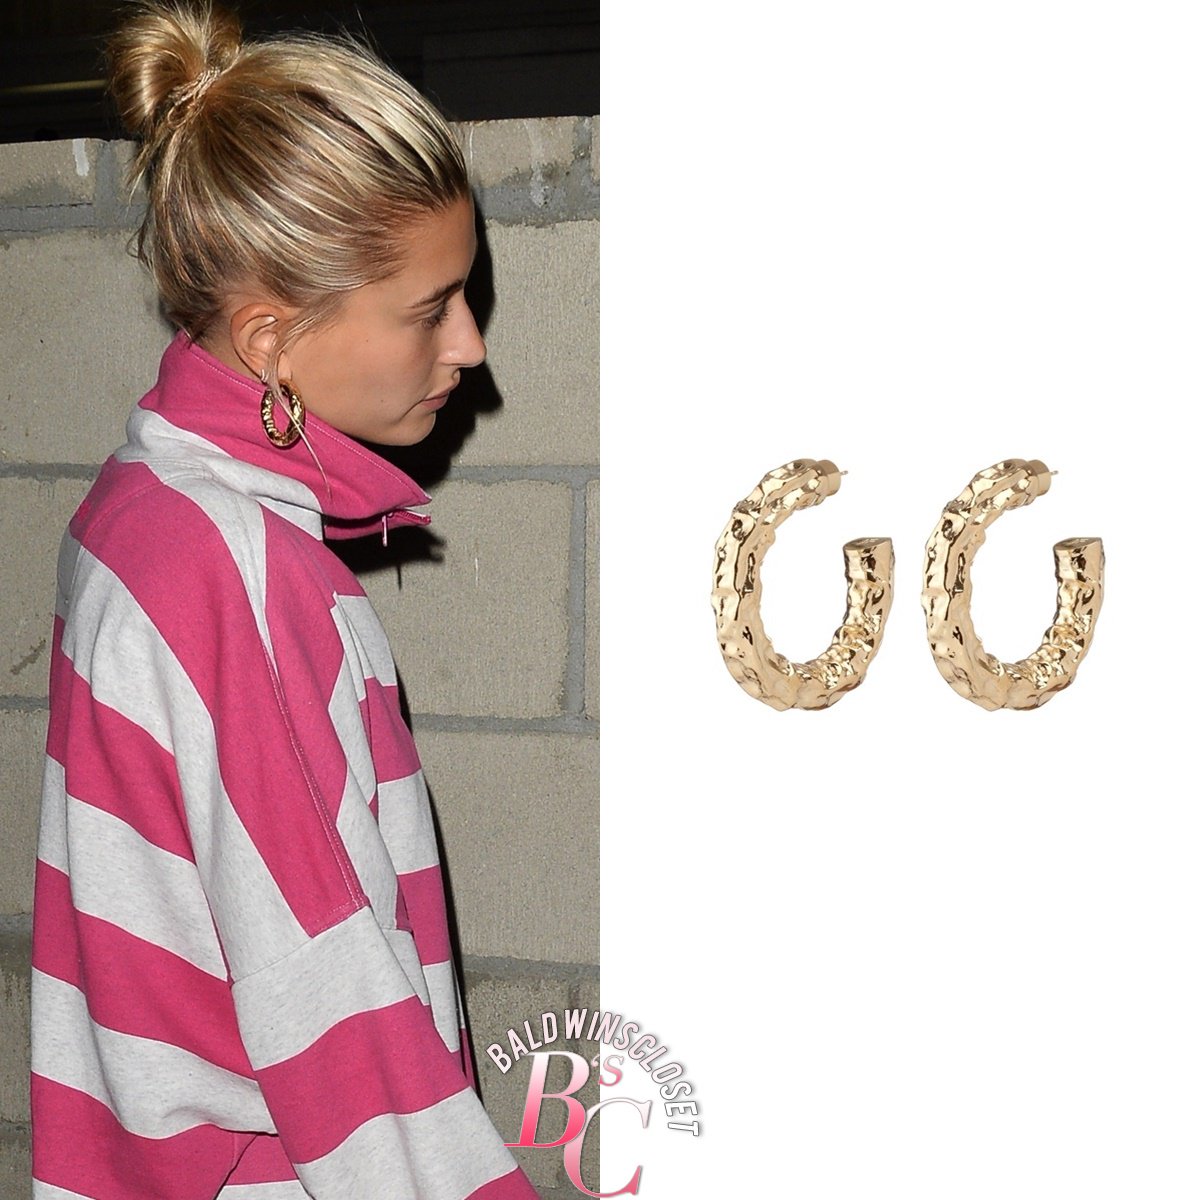 Hailey Bieber's Closet on X: October 23, 2018 - #HaileyBaldwin wore a  Vintage #Chanel Logo Sweatshirt for ￥298,000, #AcneStudios Velcro Sneakers  for $380.00, #LouisVuitton Palm Springs Backpack for $1,940.00. And a  personalised